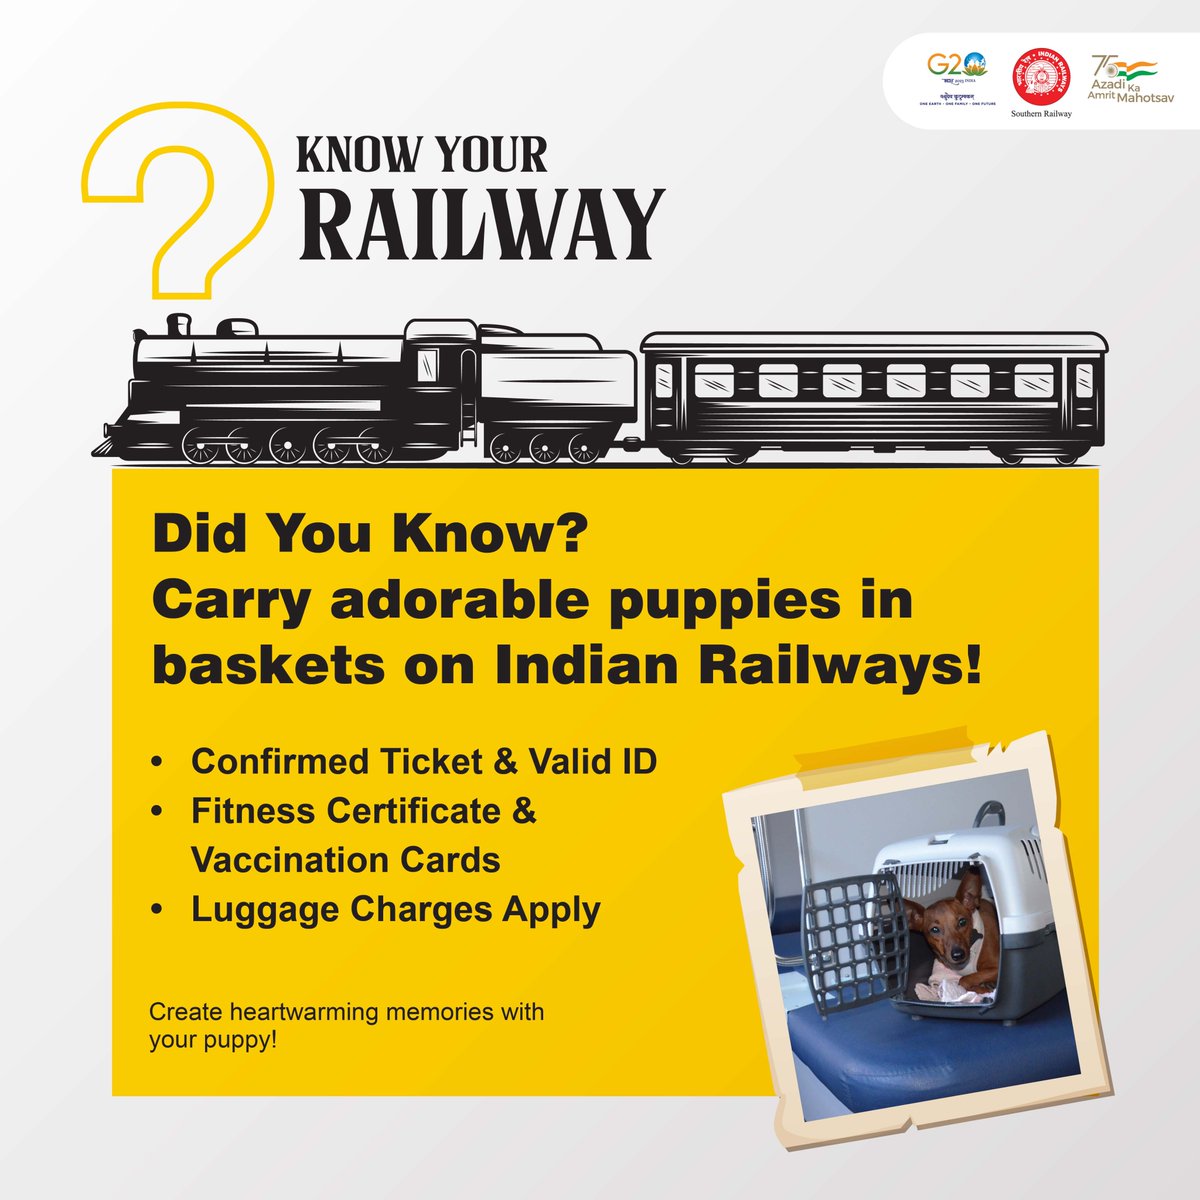 🧺🐶 Just ensure you've got a confirmed ticket, valid ID, fitness certificate, and vaccination cards ready for your furry travel companions.

We know that the smiles are priceless! 😊🐕
.
.
.
#PetFriendlyTravel #IndianRailways #SouthernRailway